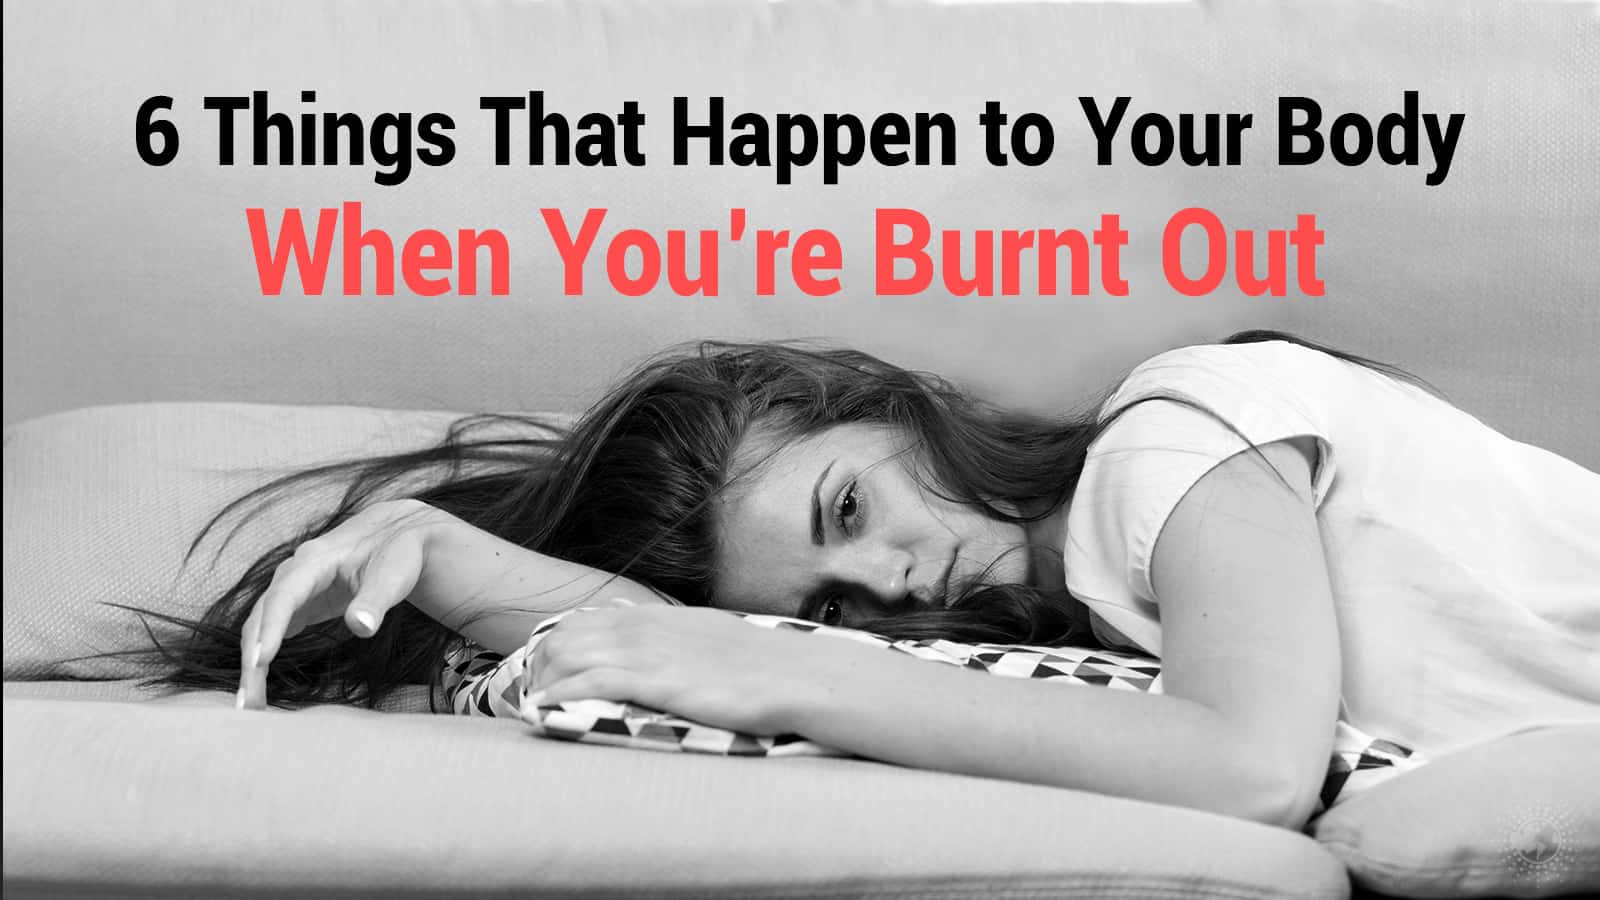 6 Things That Happen to Your Body When You're Burnt